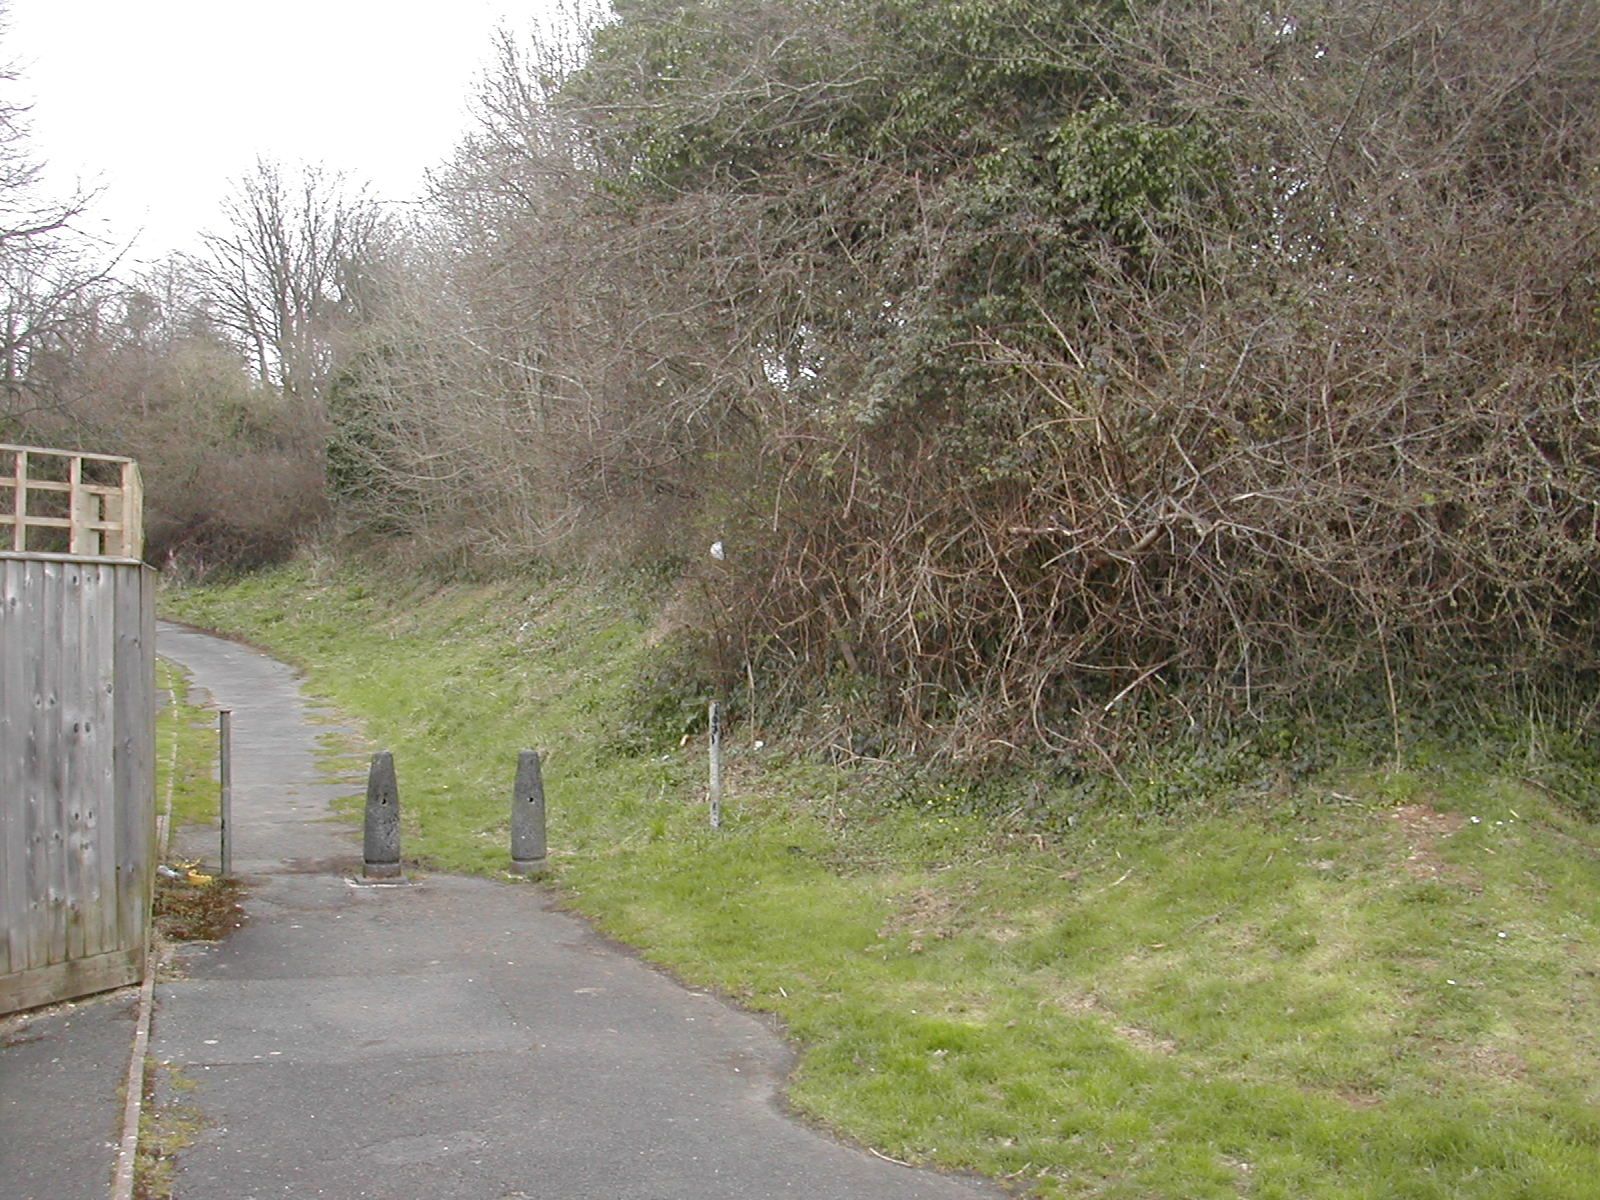 Plymouth Fortifications